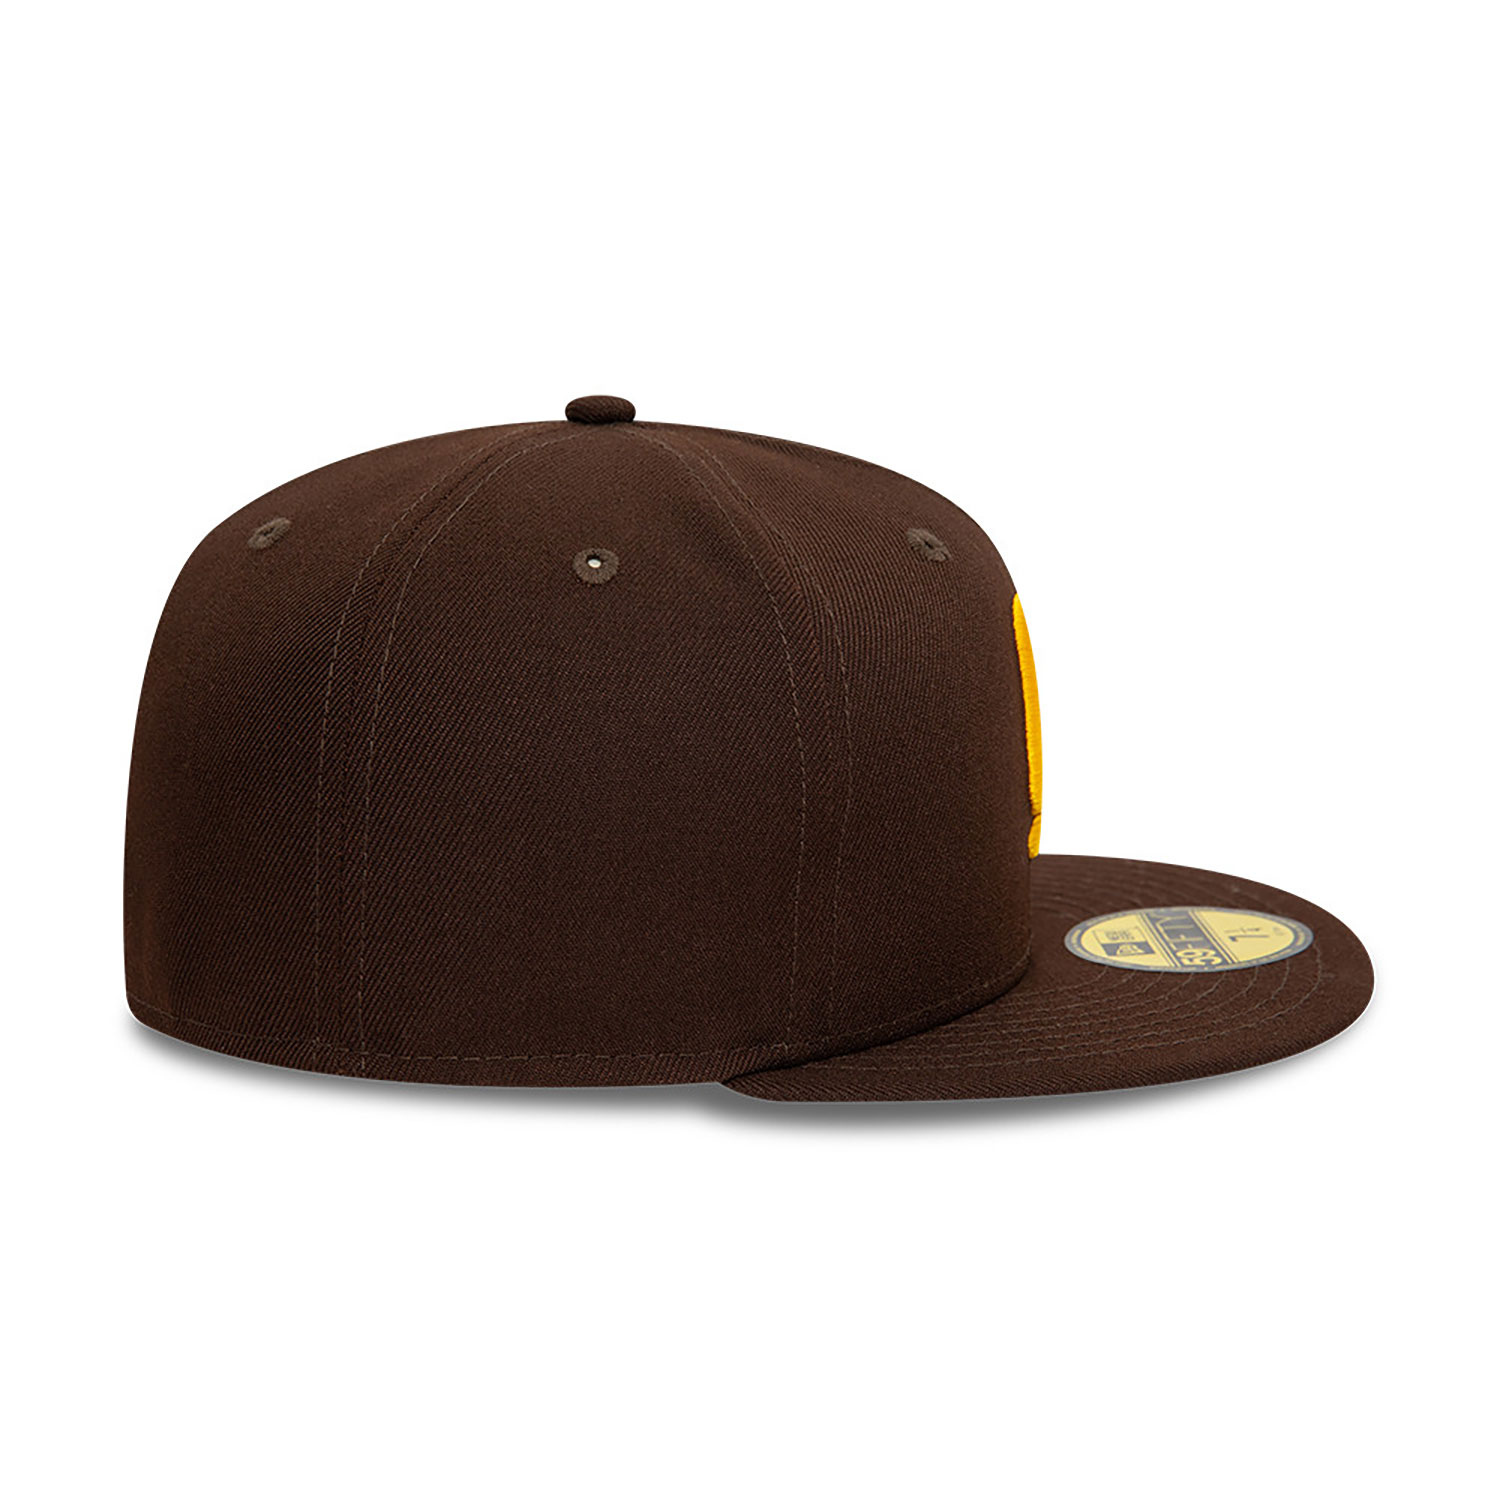 San Diego Padres Upside Down Team Colour Dark Brown 59FIFTY Fitted Cap